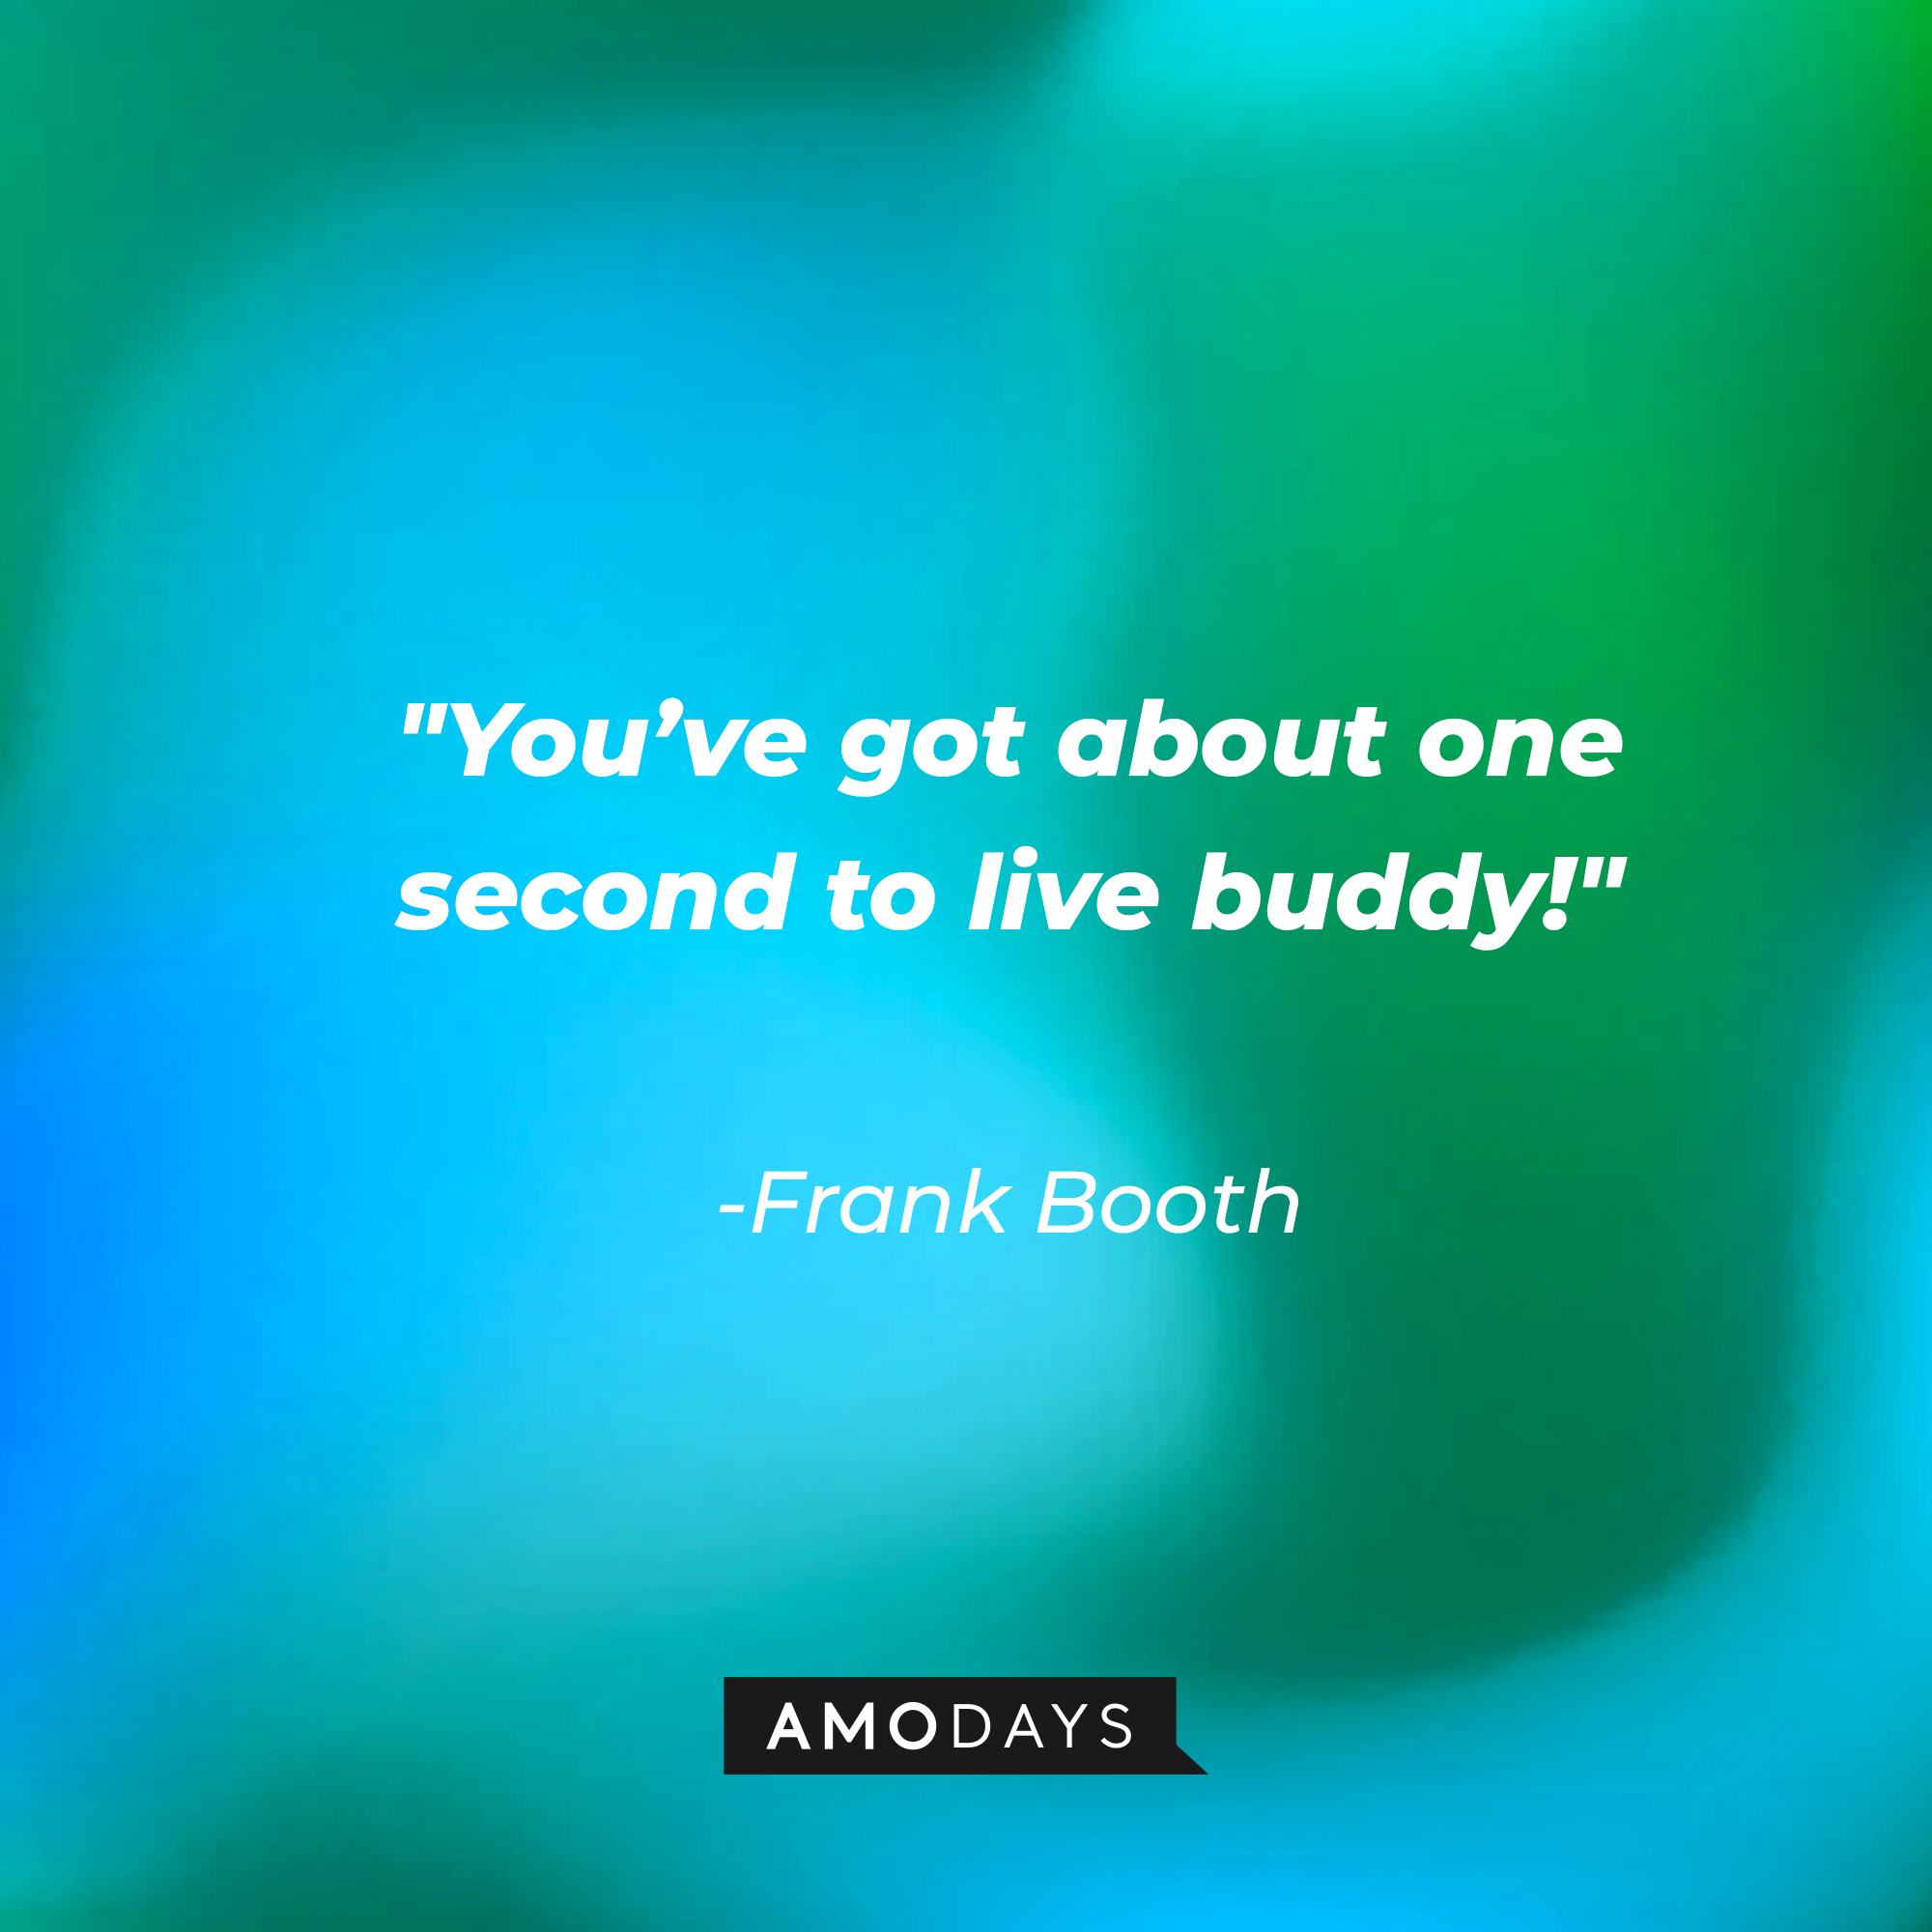 Frank Booth with his quote: "You've got about one second to live buddy!" | Source: facebook.com/BlueVelvetMovie